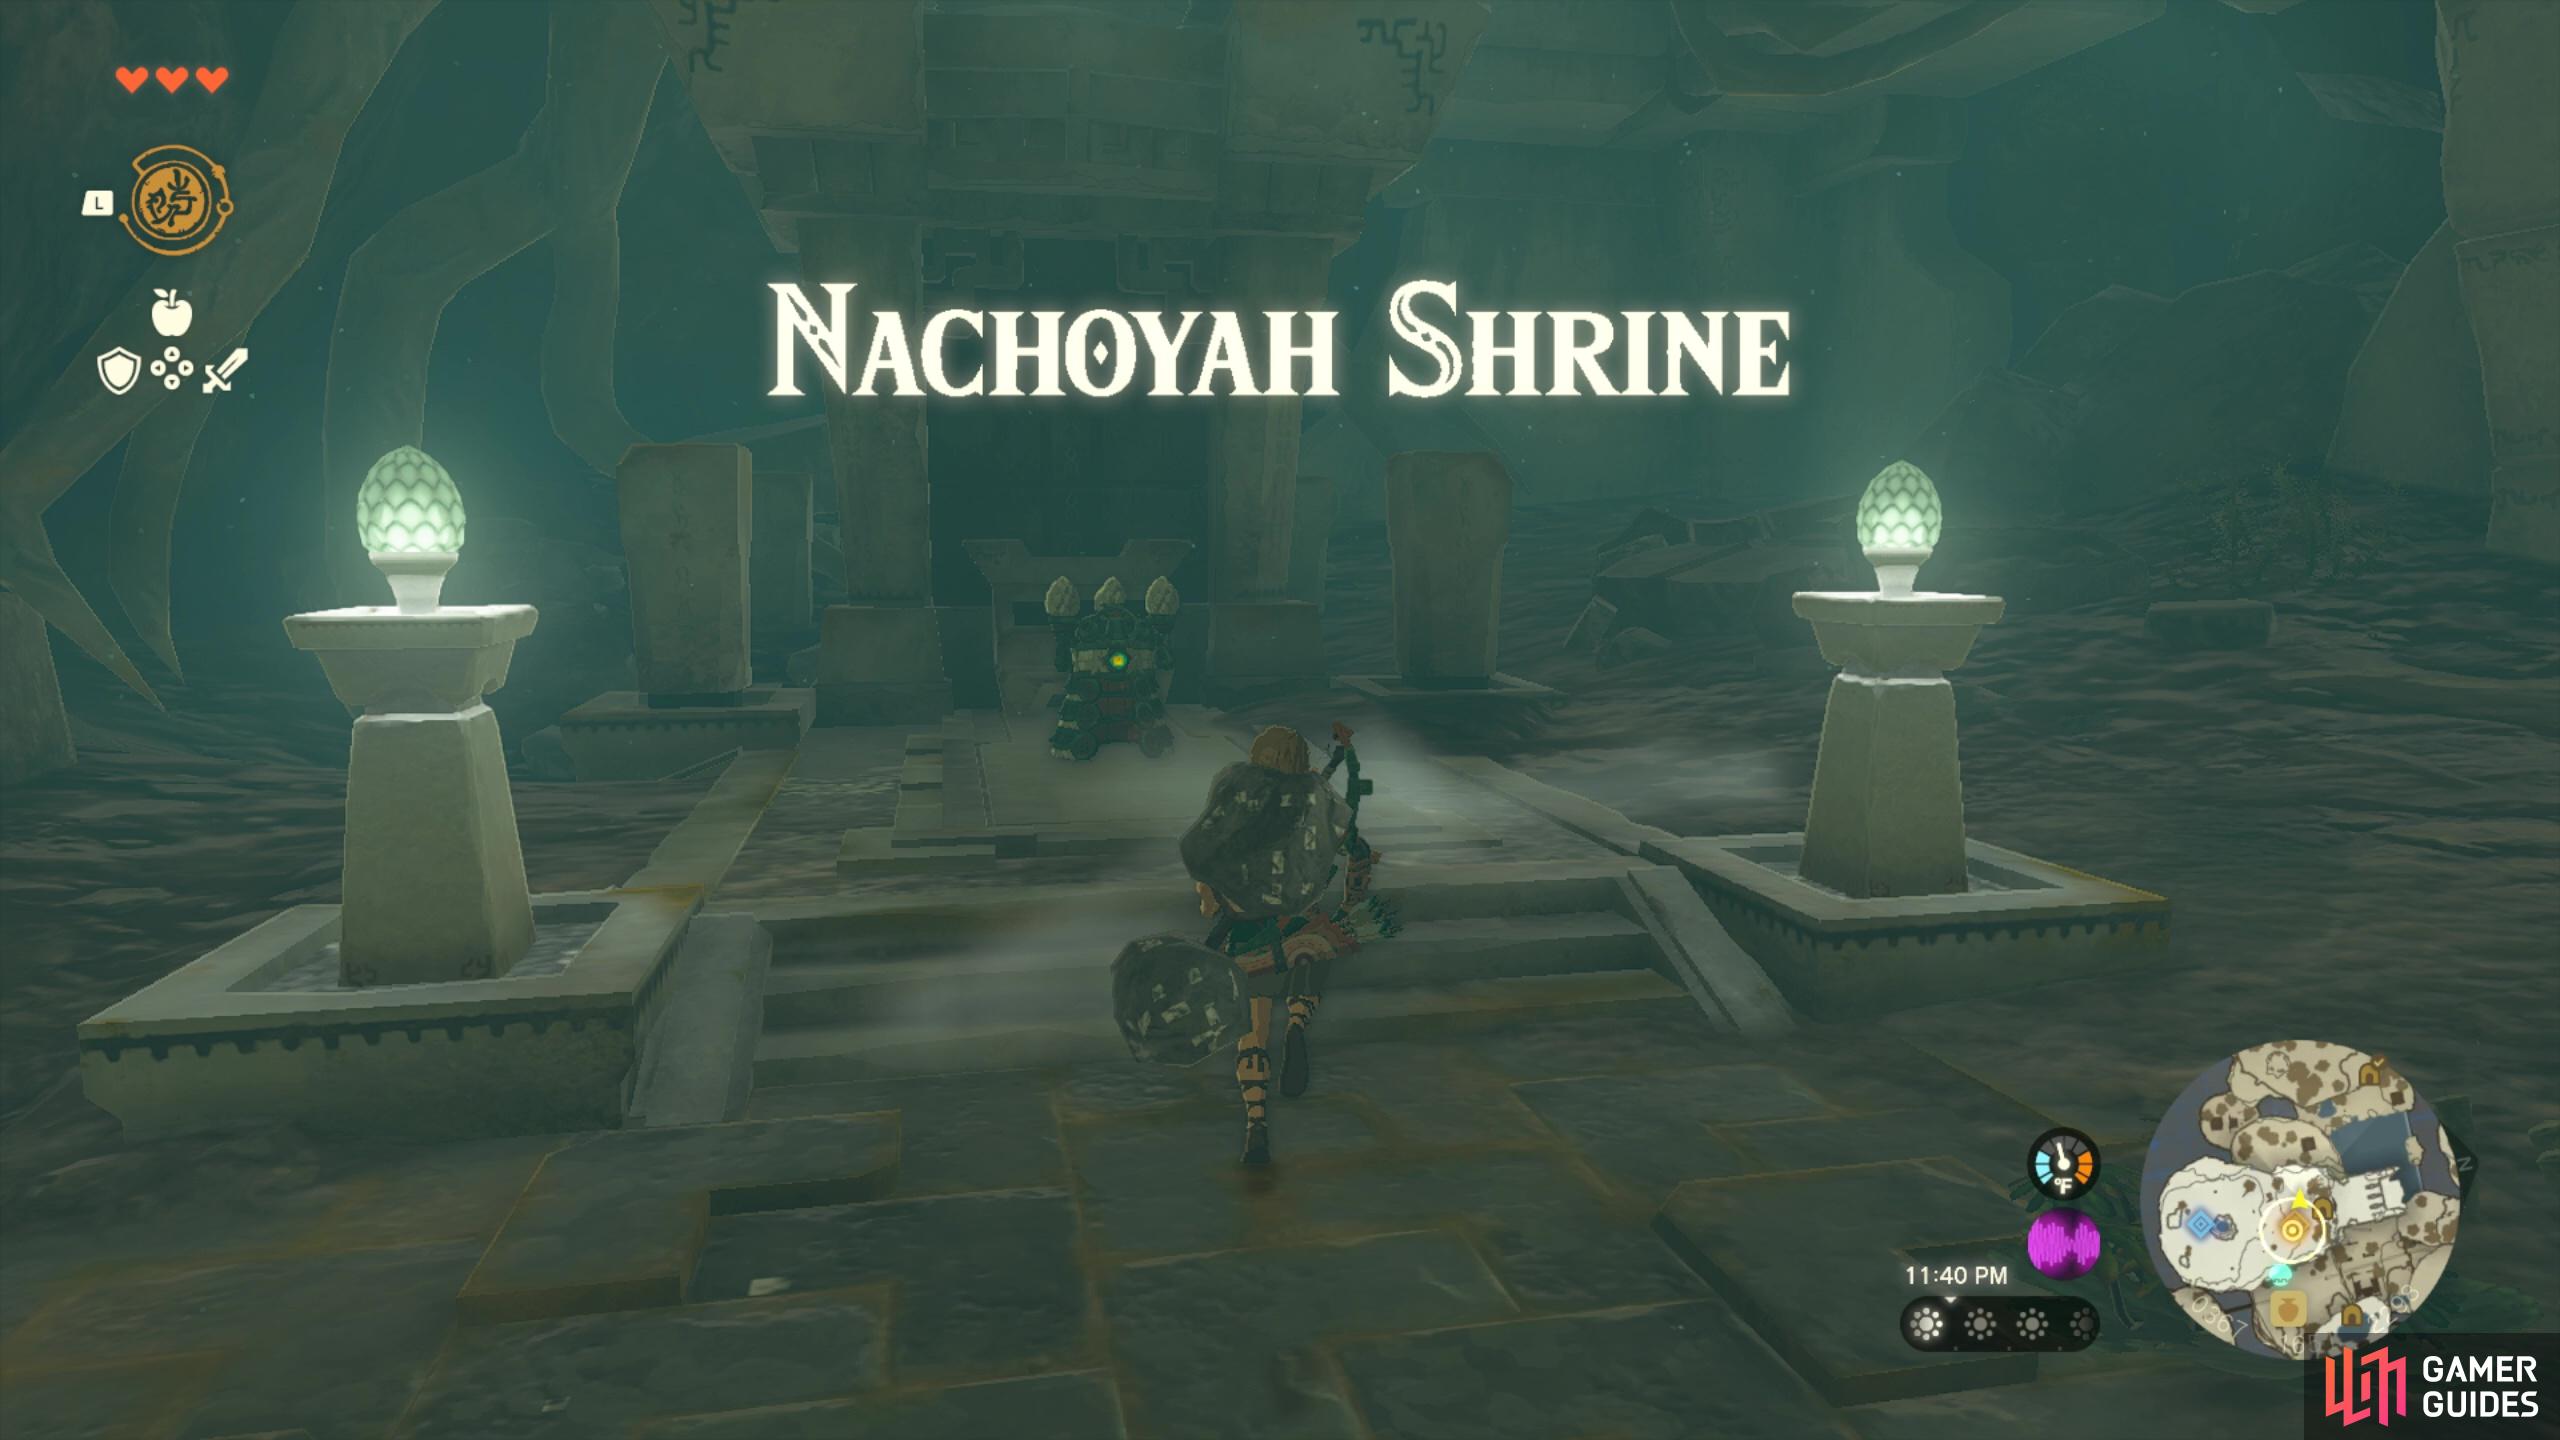 You’ll find Nachoyah Shrine in the next room!